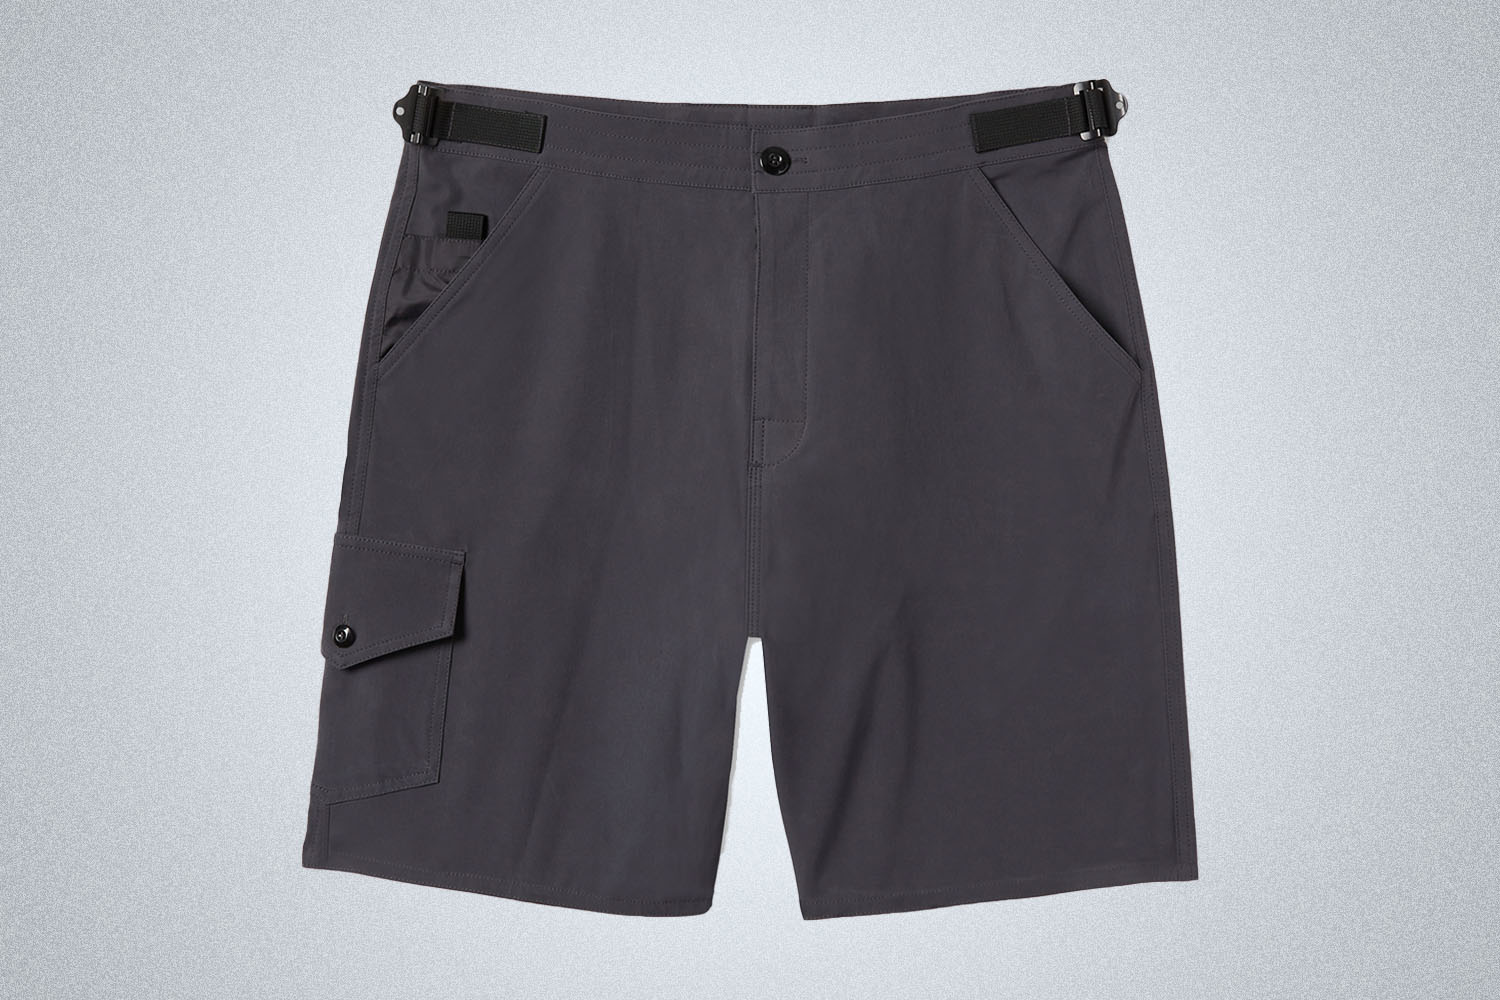 a pair of charcoal colored shorts from Birdwell Britches x Filson